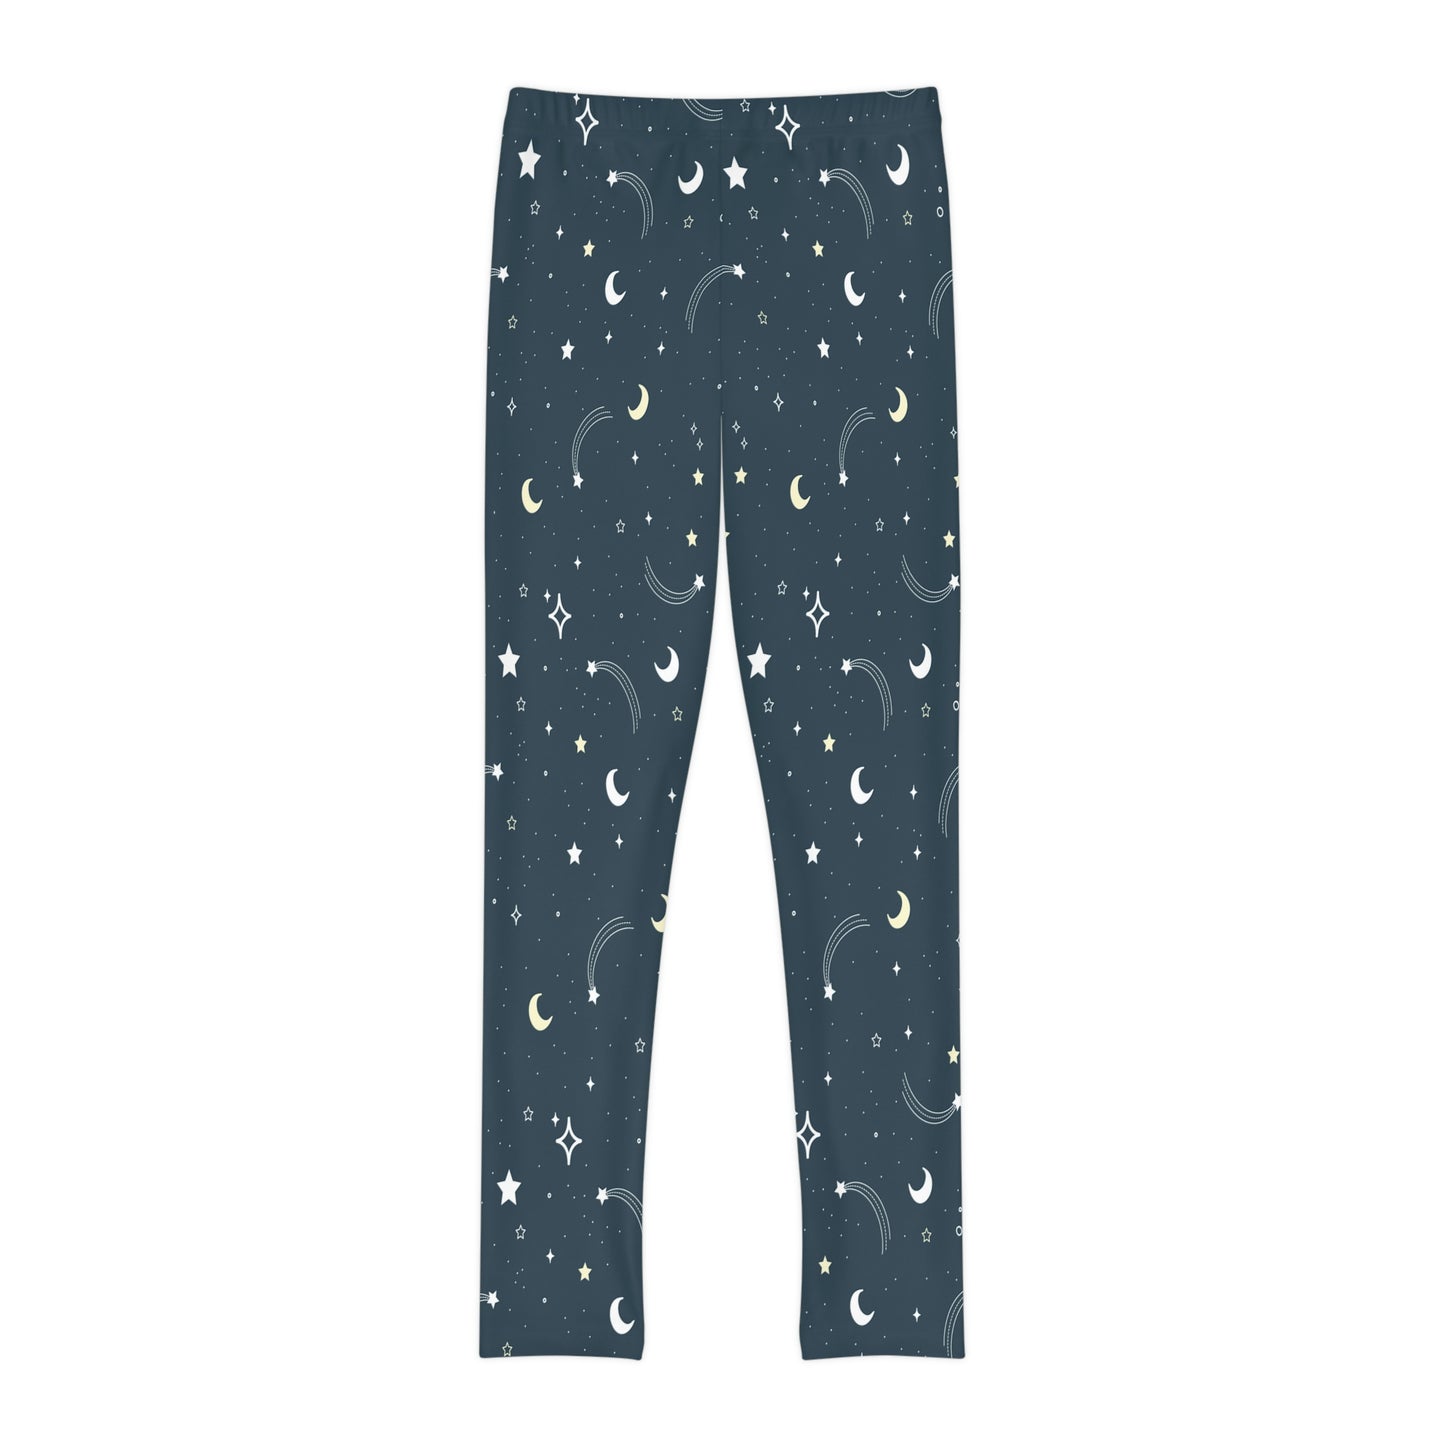 Galaxy, Moon and stars Celestial Youth Leggings, One of a Kind Gift - Unique Workout Activewear tights for kids, Daughter, Niece  Christmas Gift